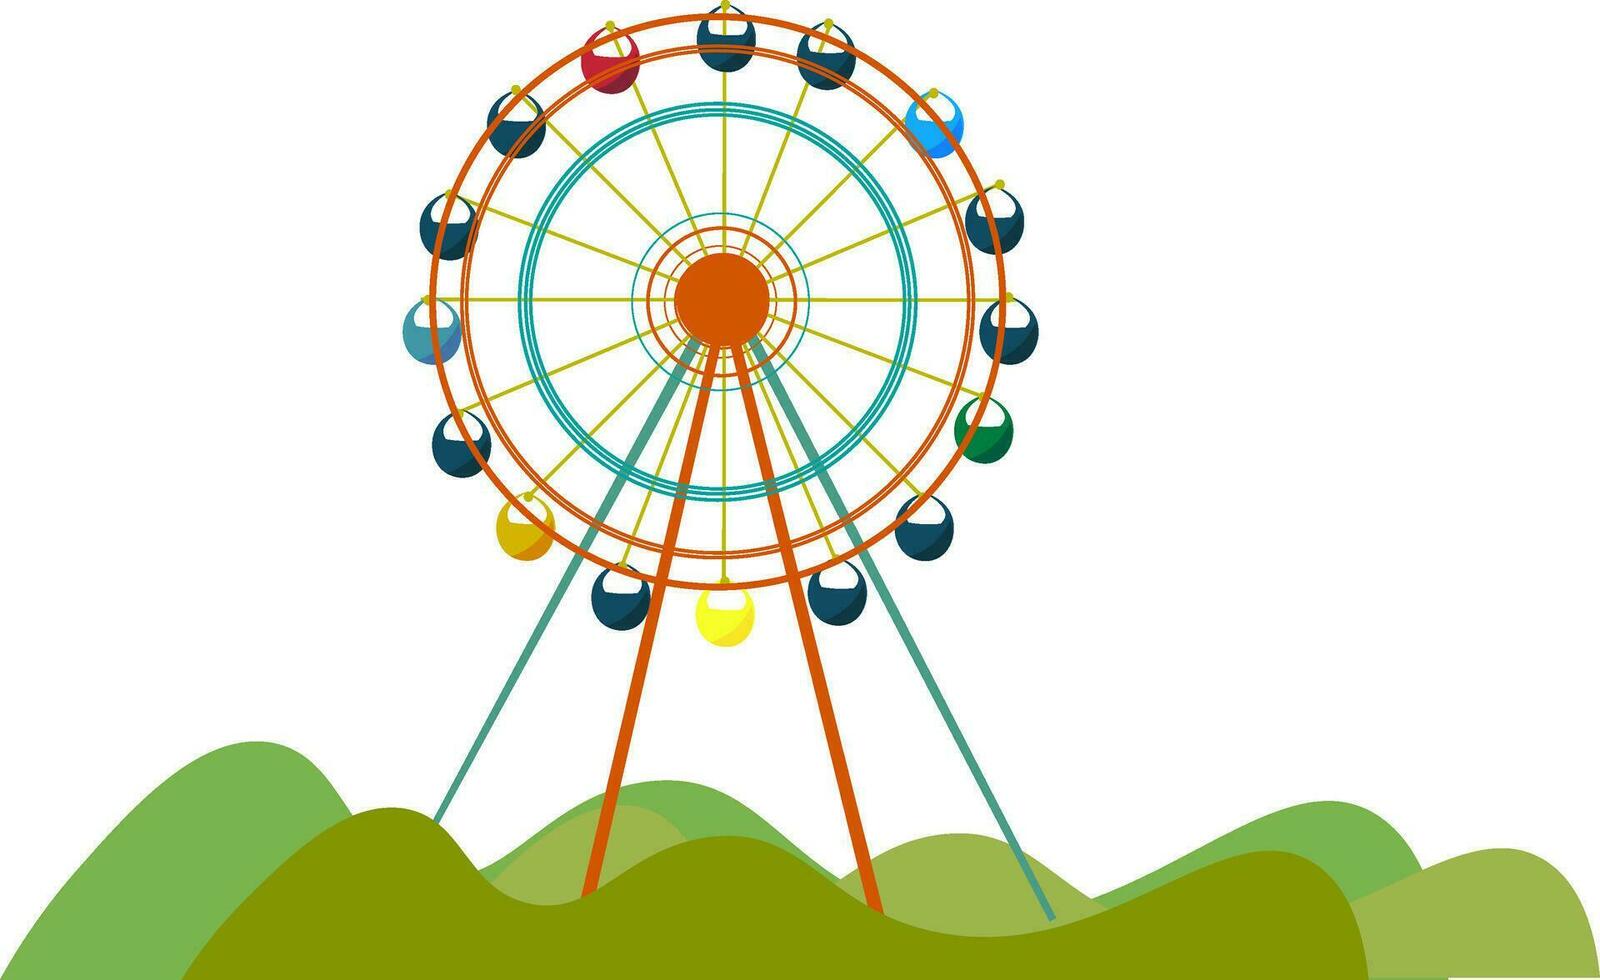 Giant Ferris vector or color illustration